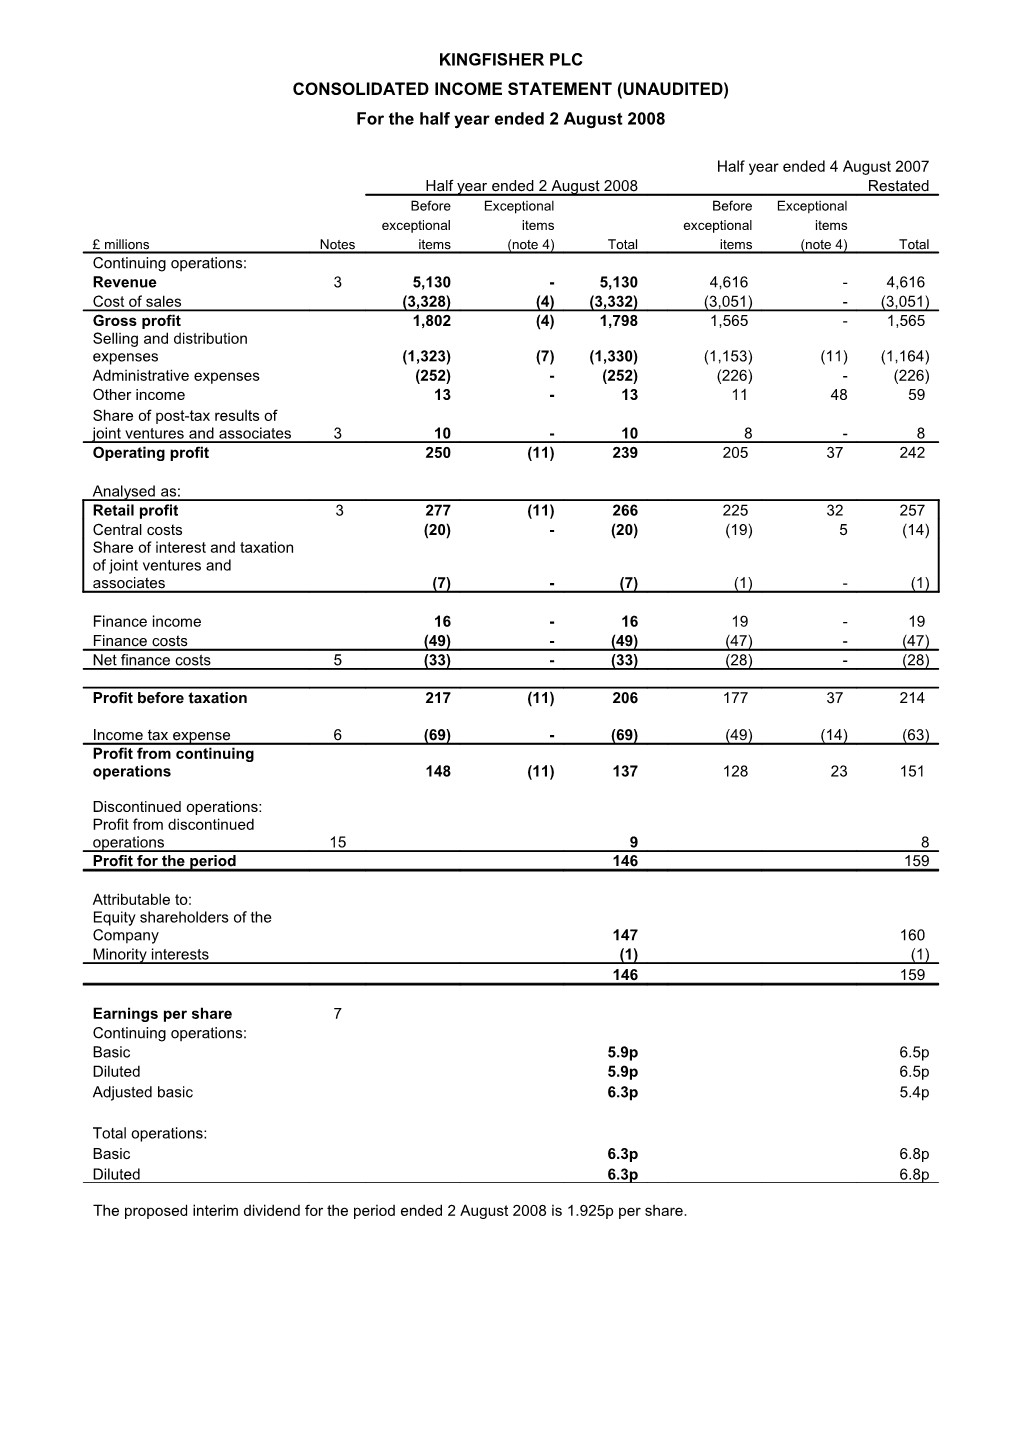 Consolidated Income Statement (Unaudited)